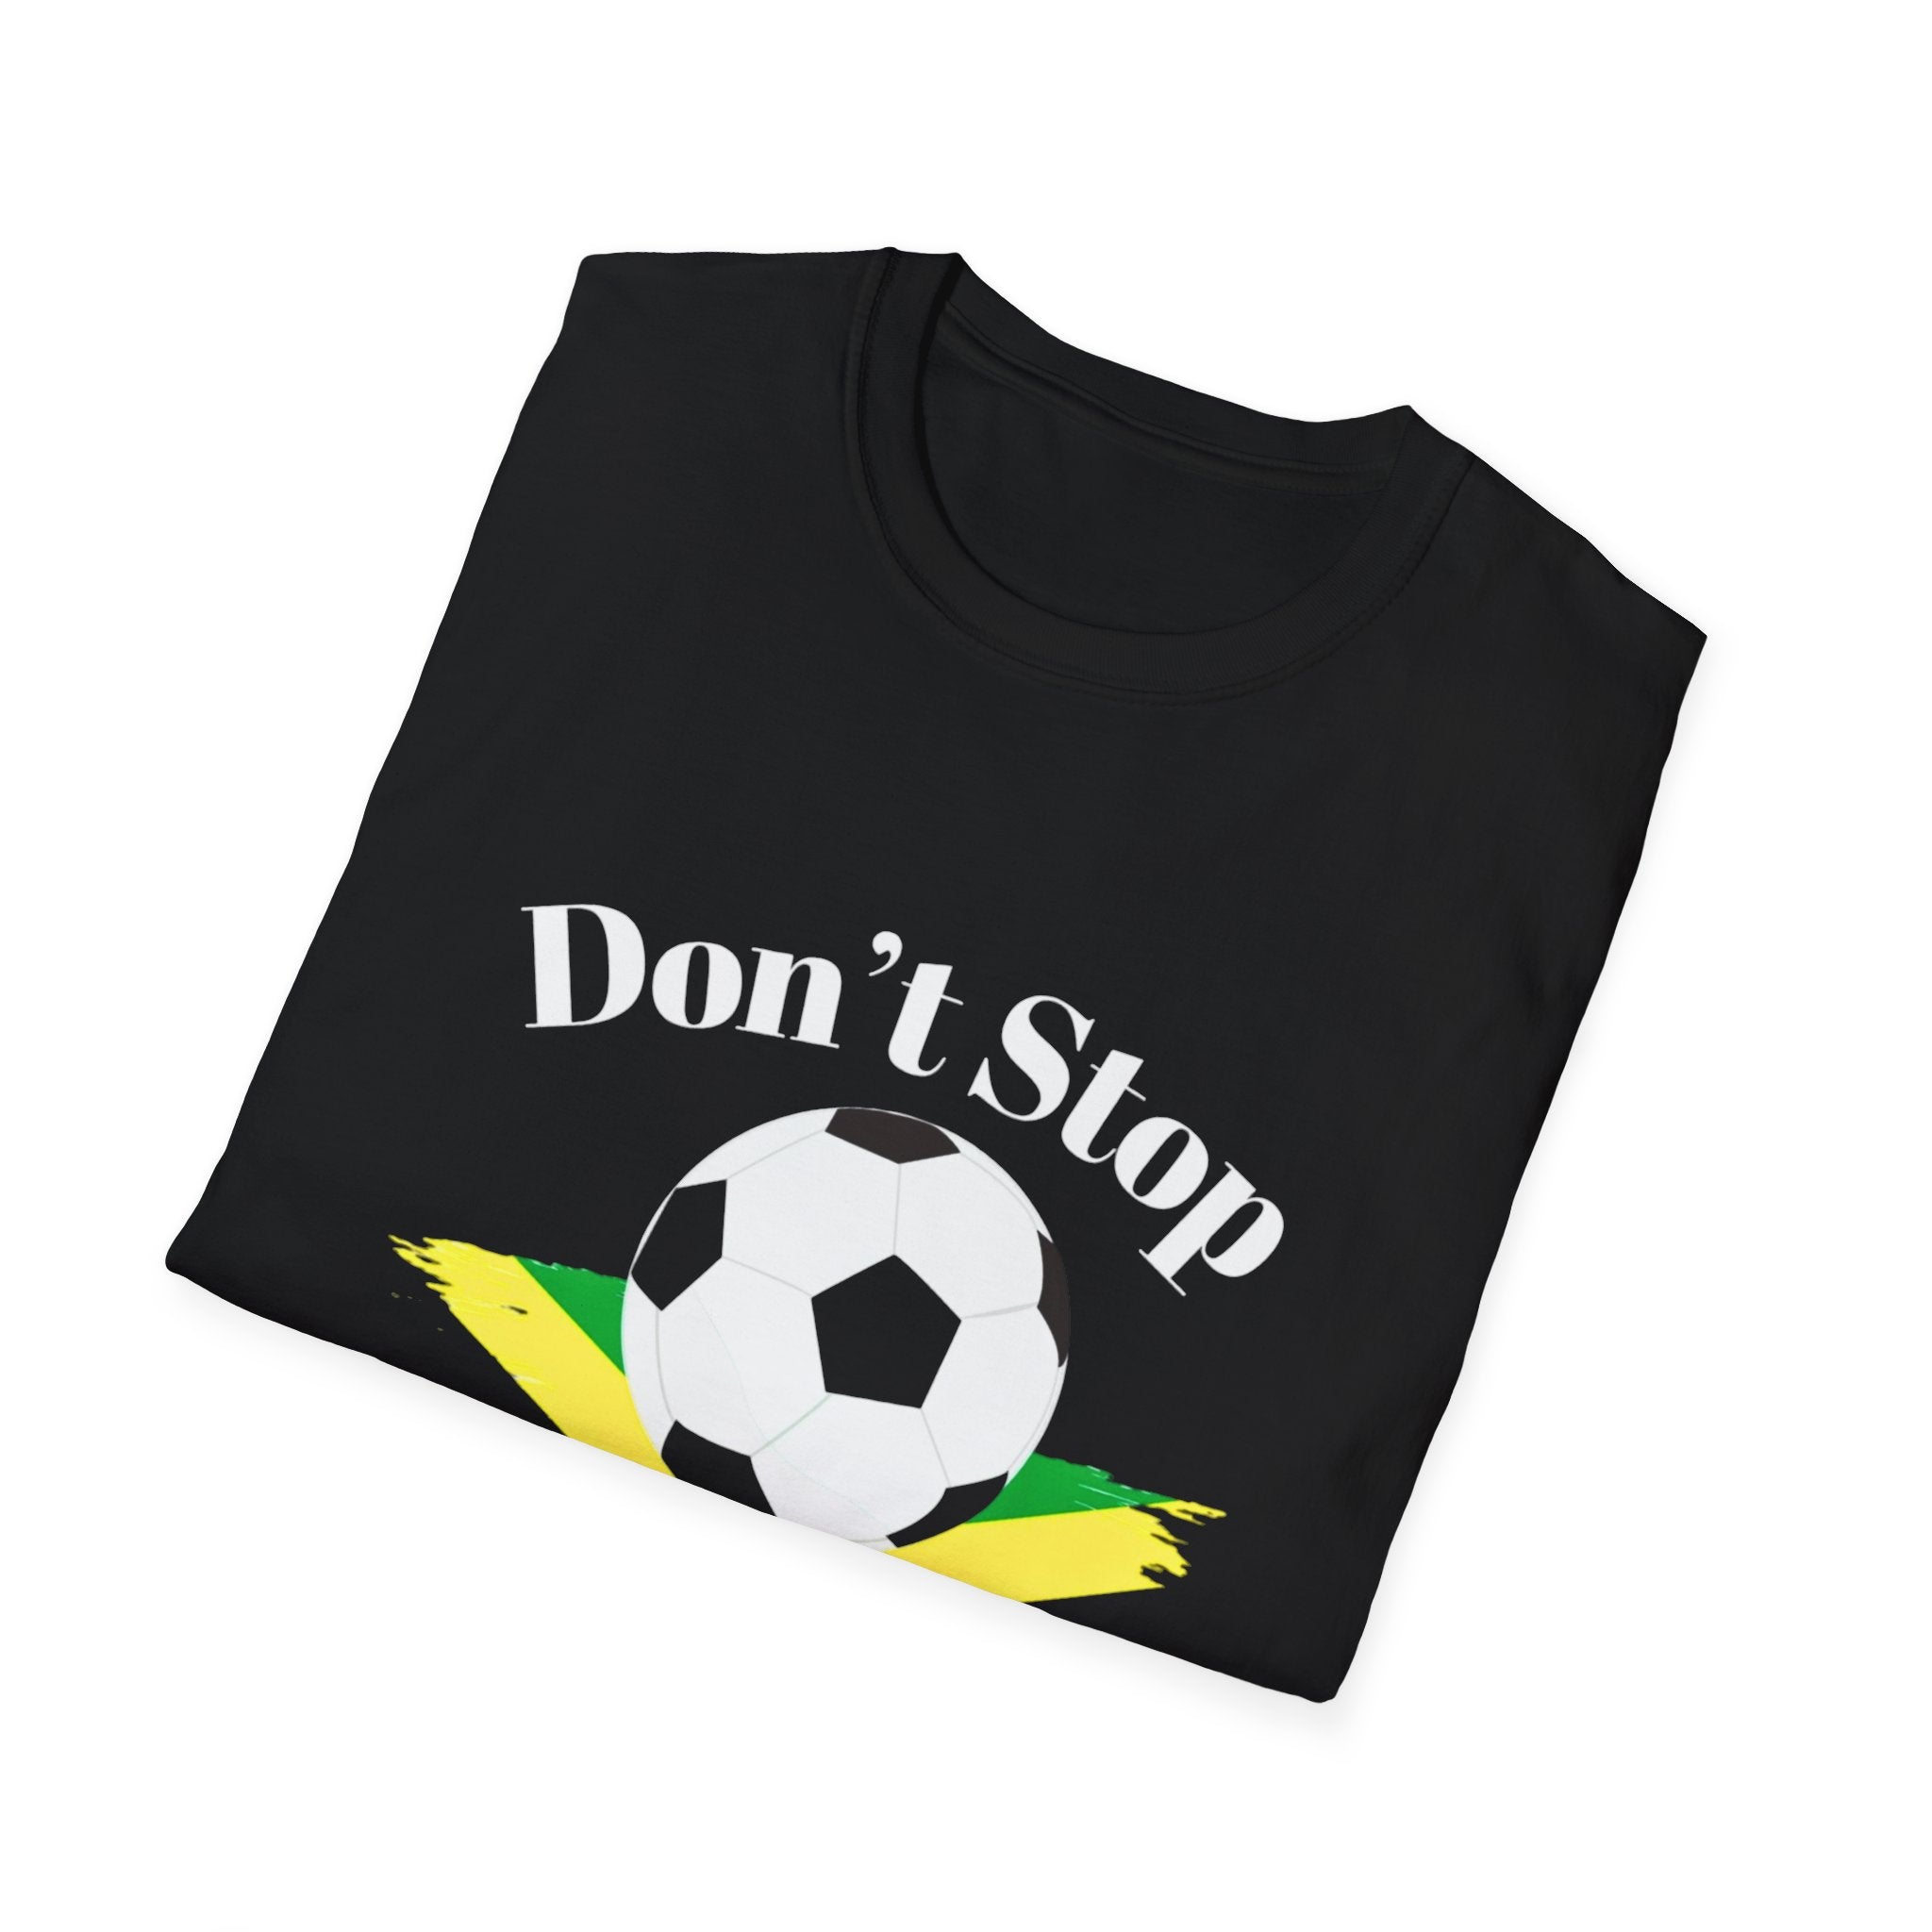 Jamaica "Don't Stop Believing" Road to World Cup 2026